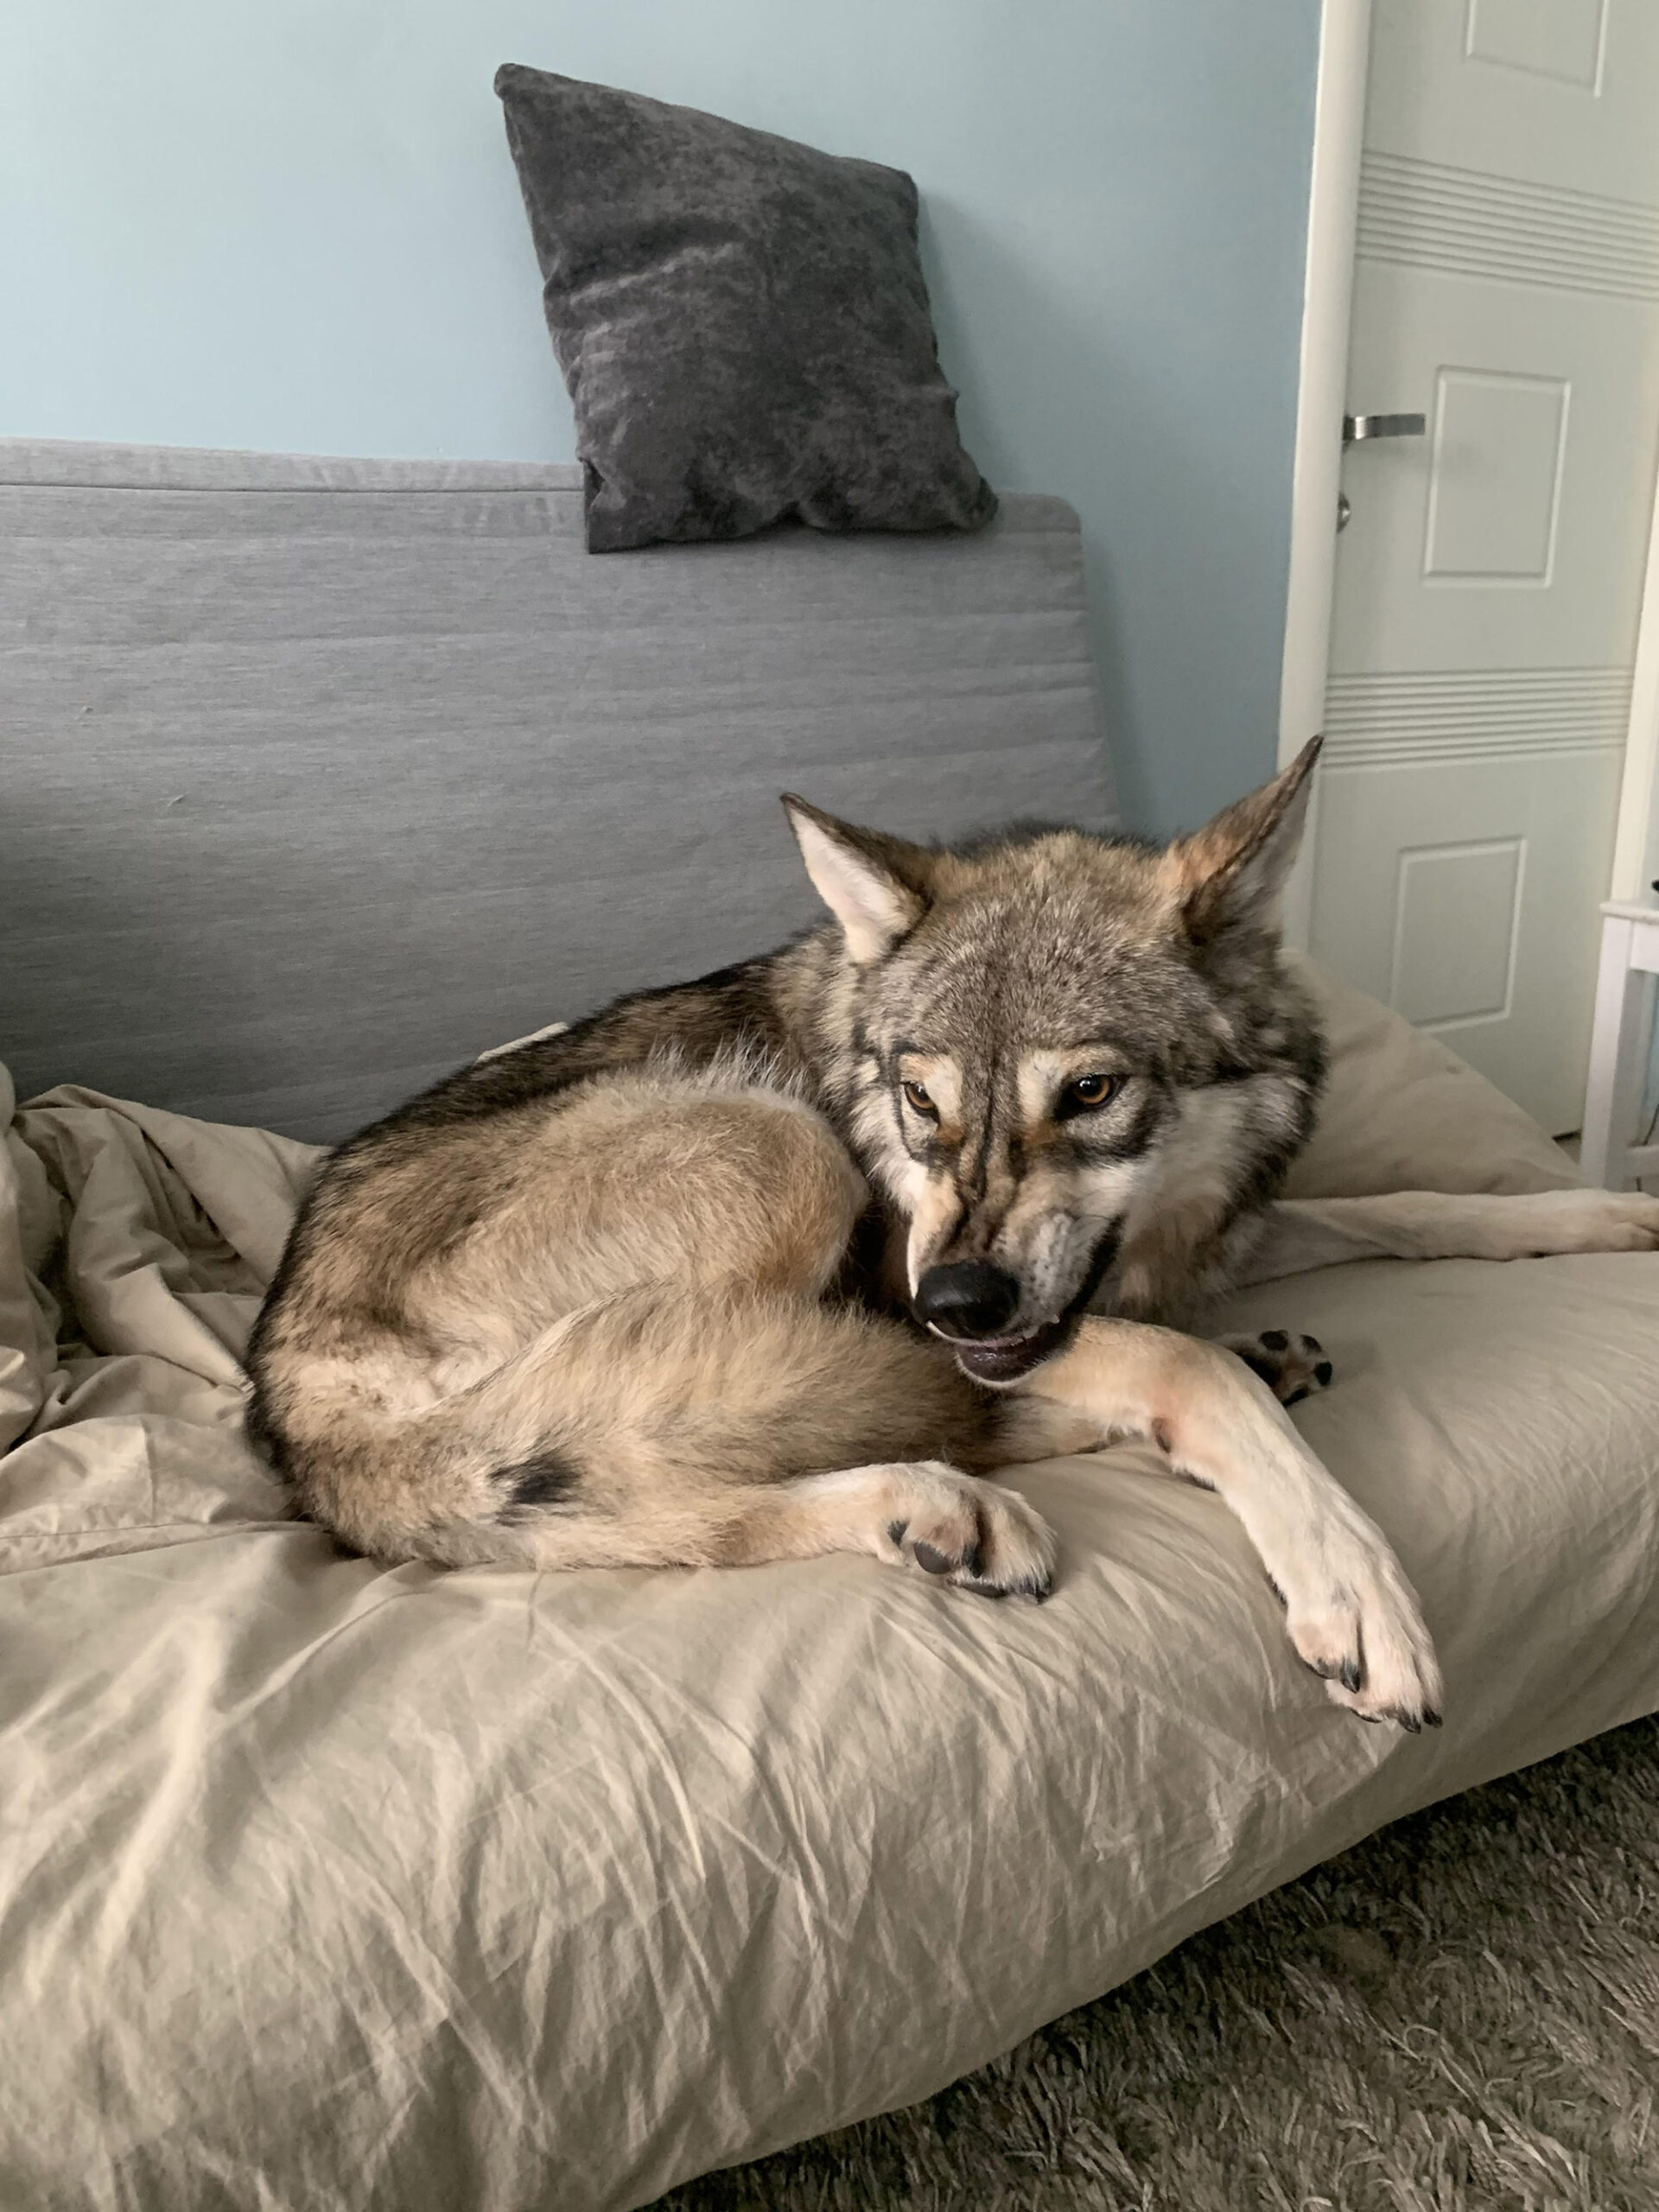 Picture of Kira the wolfdog while her attention is elsewhere. (@she.s.a.wolf/Zenger)